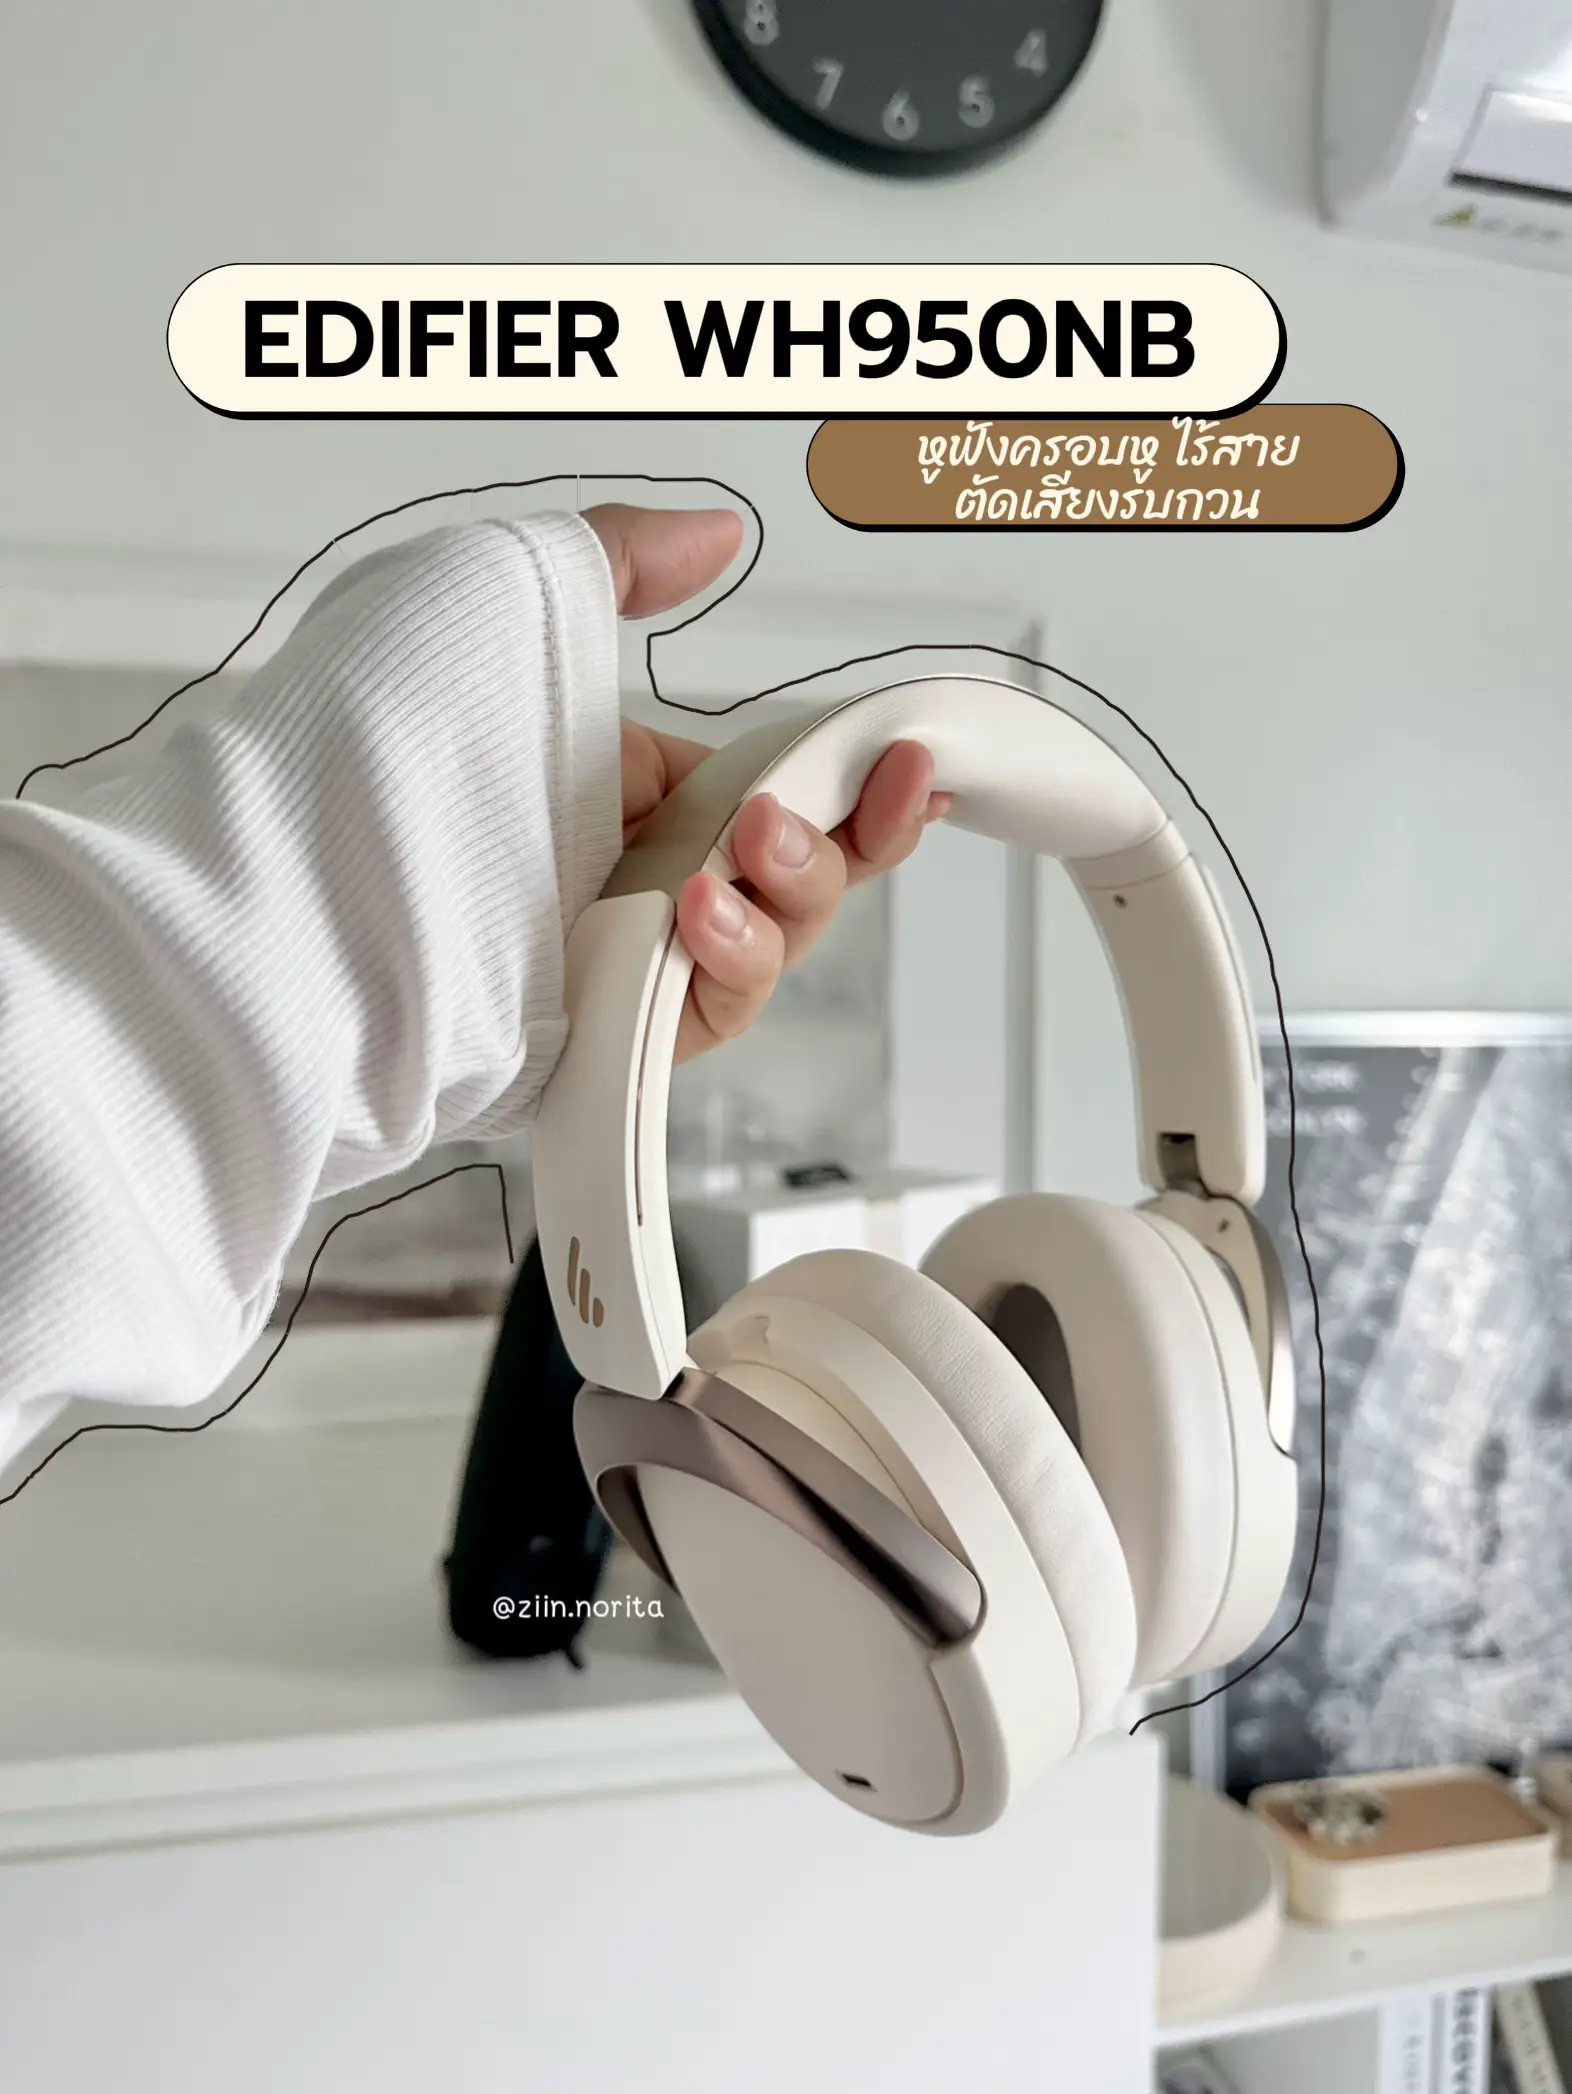 Edifier WH950NB wireless headphones, ANC WH950NB ivory